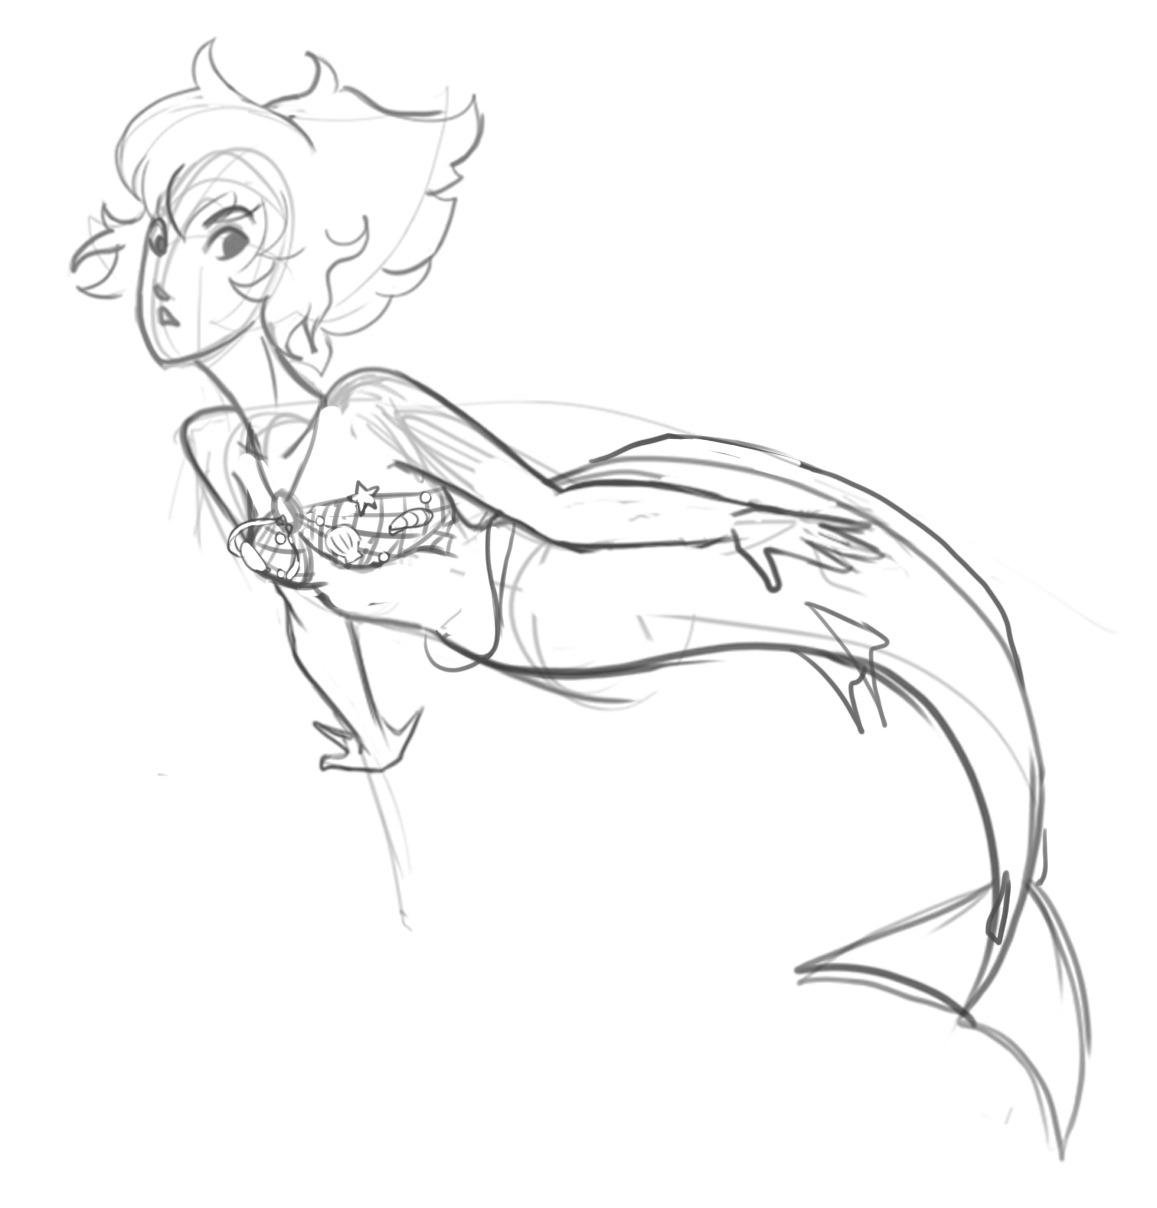 I had to draw lapis as a mermaid too!!!